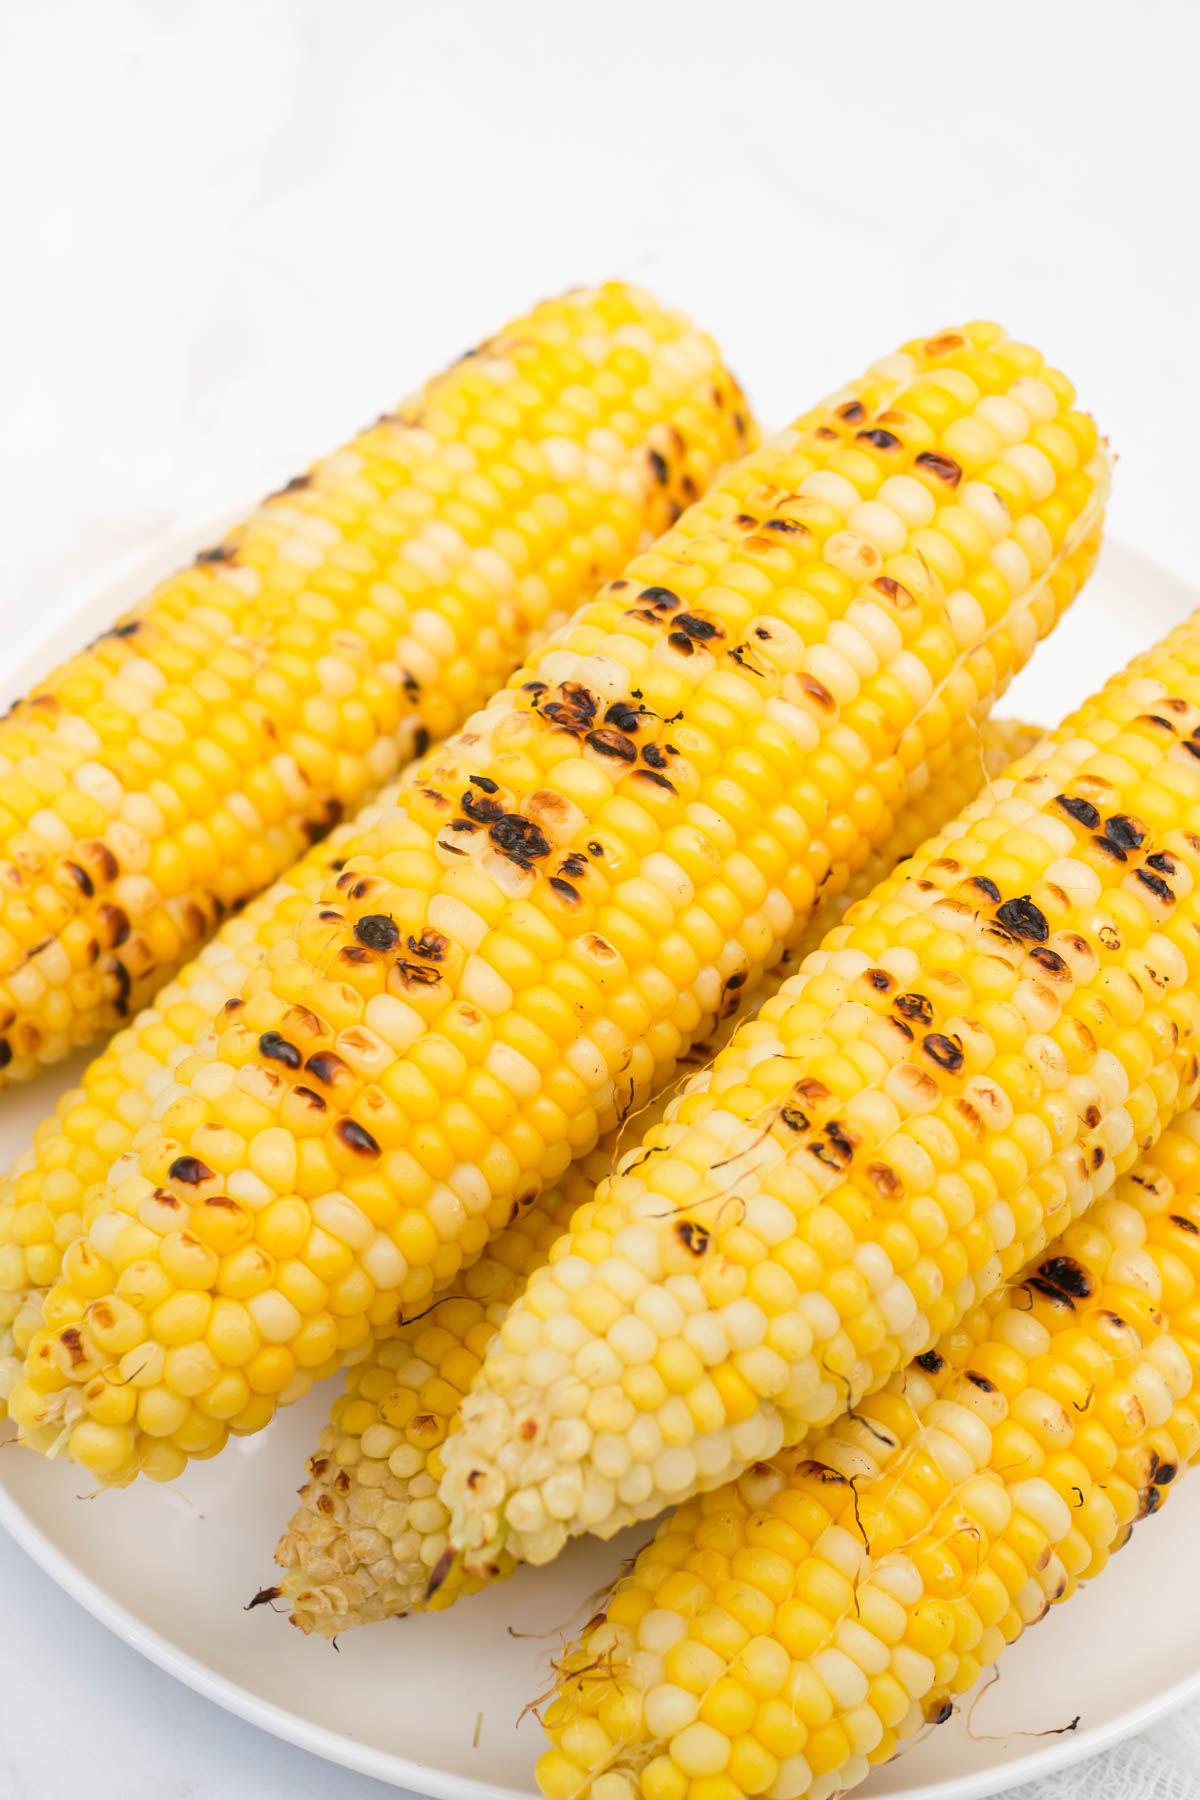 the completed corn on the cob removed from the grill and ready to serve.